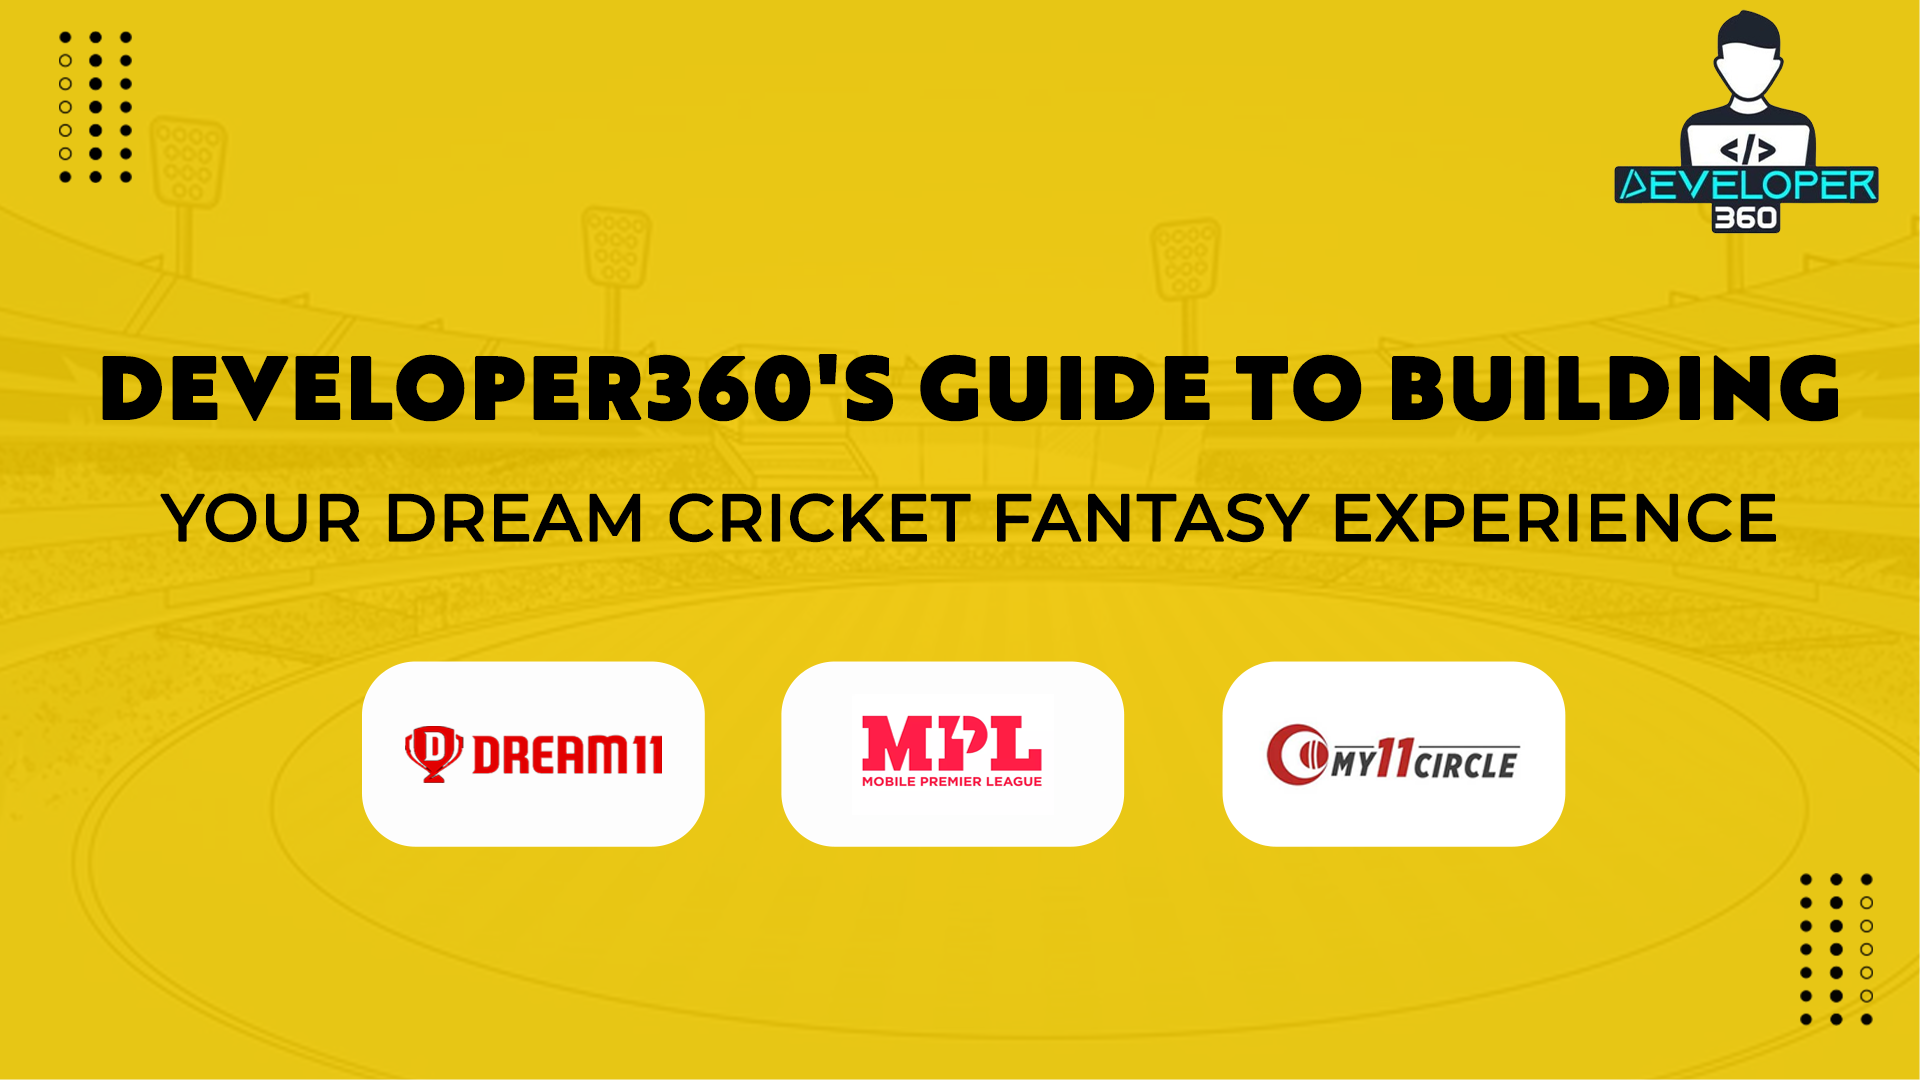 Developer360's Guide to Building Your Dream Cricket Fantasy Experience